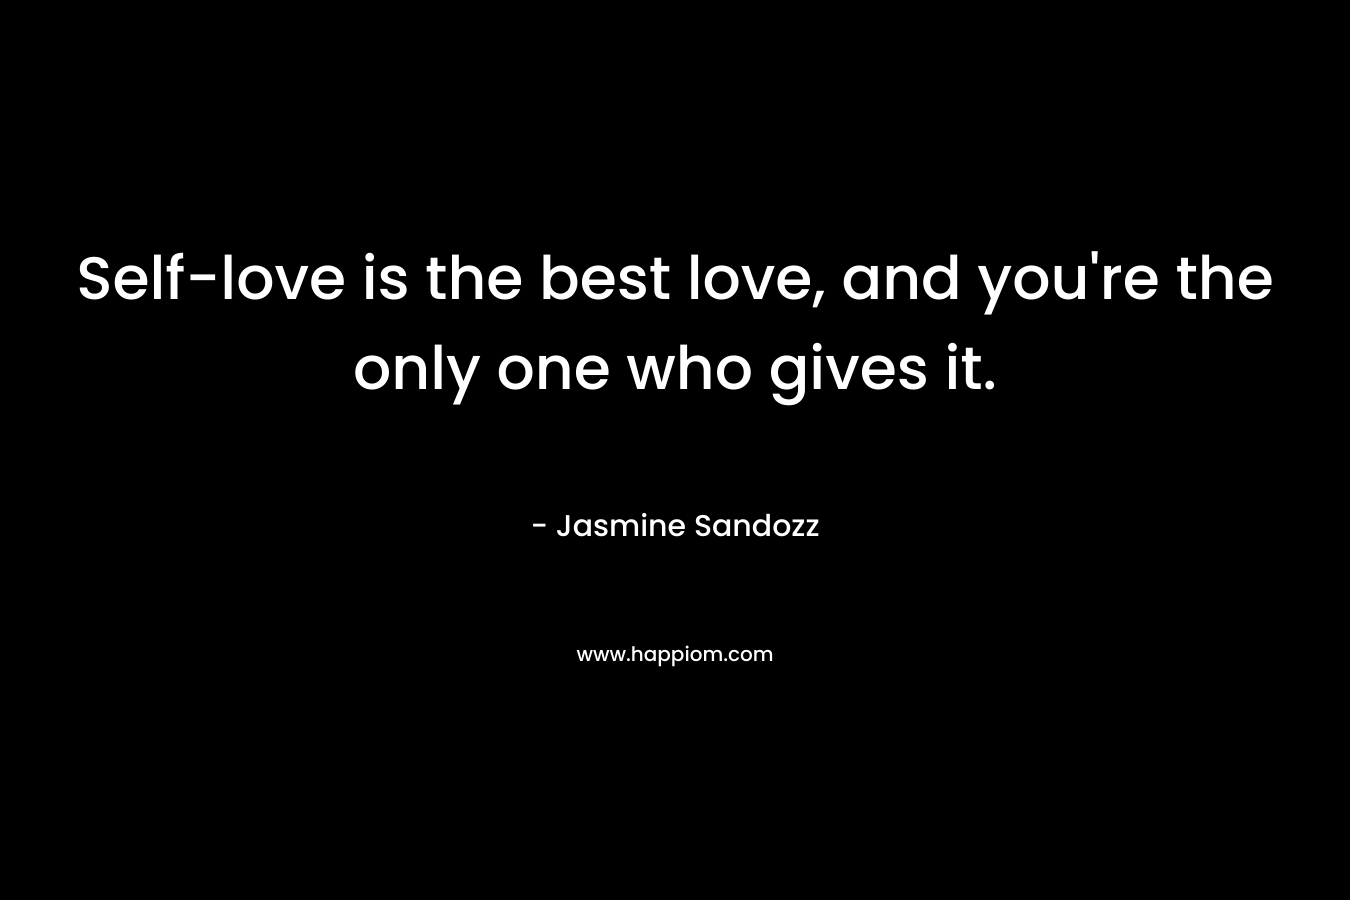 Self-love is the best love, and you're the only one who gives it.